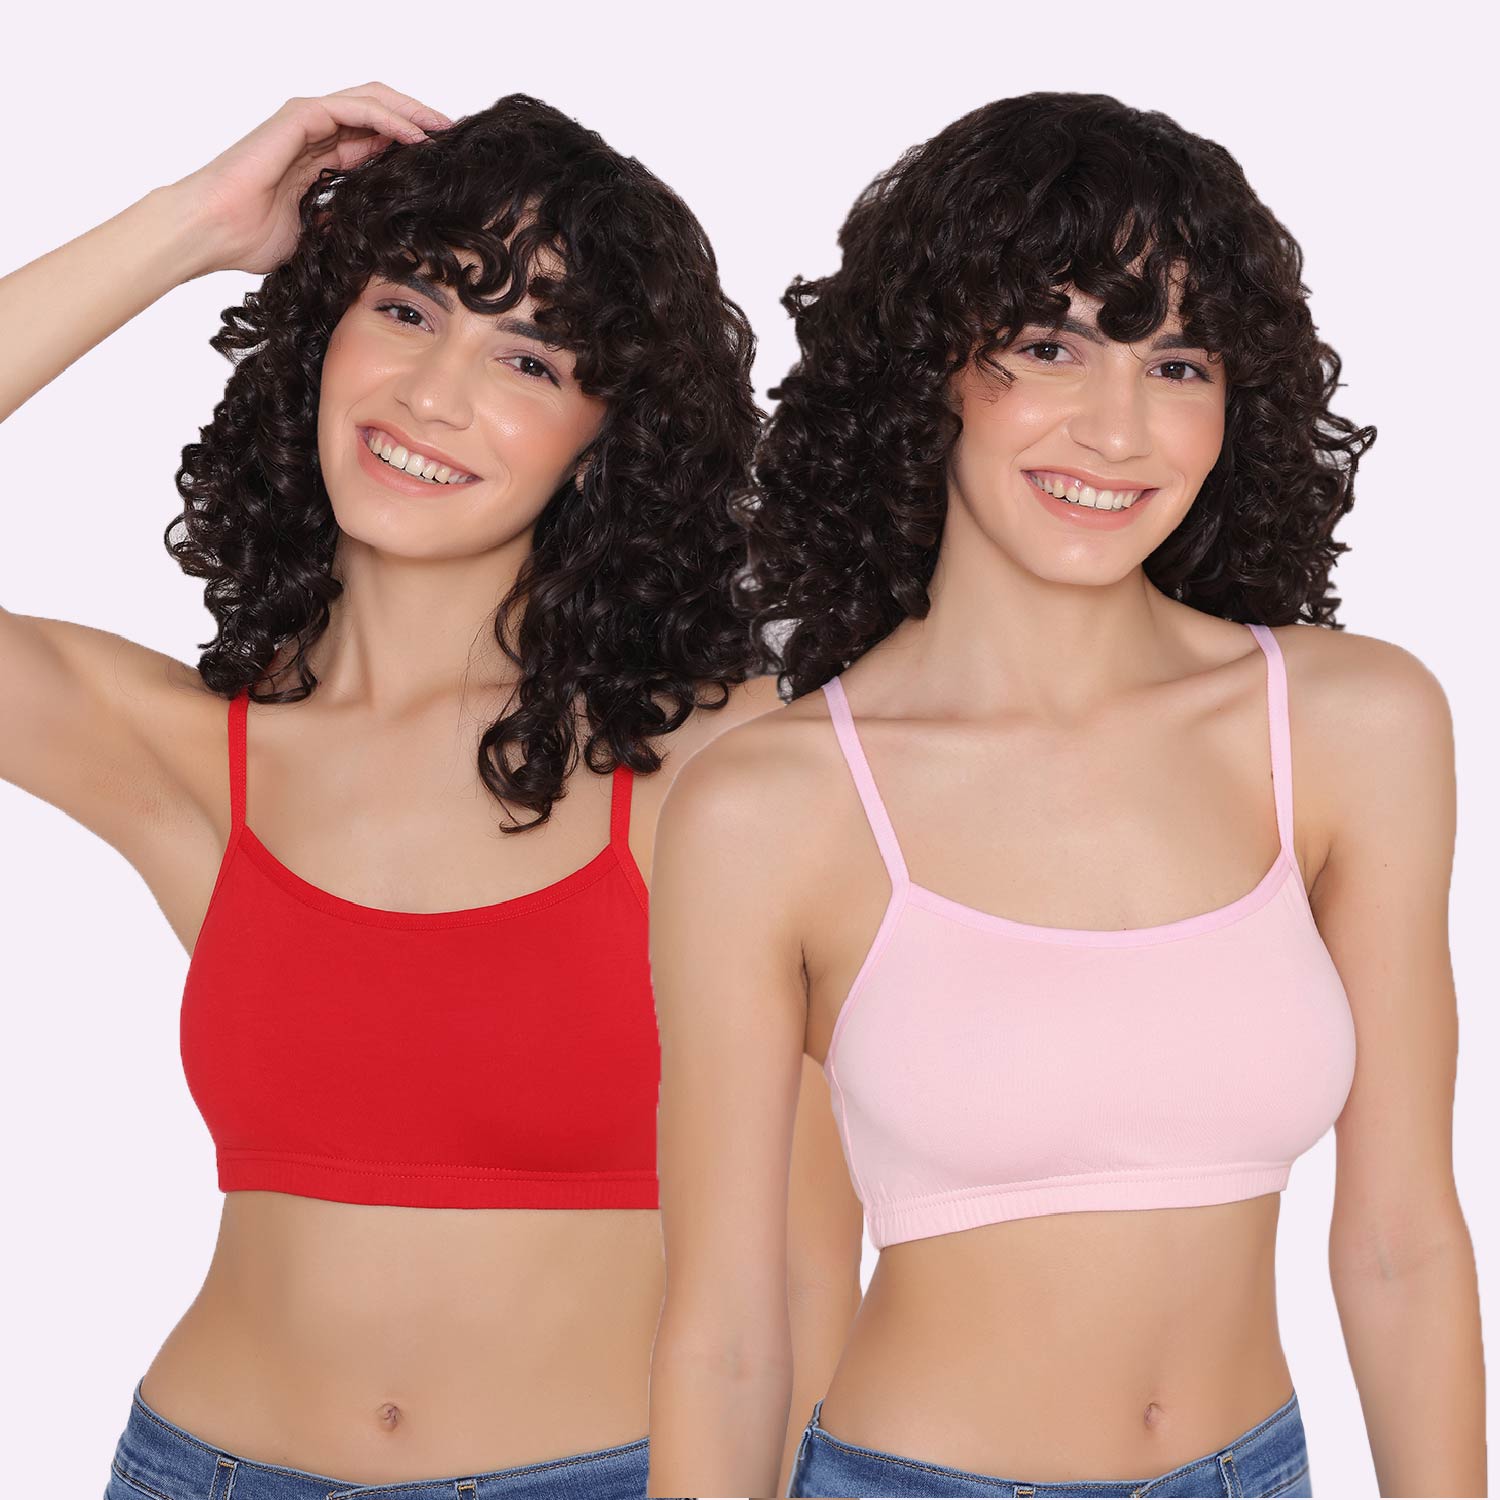 Buy Beautiful Padded Bra (Combo 2) Online In India At Discounted Prices